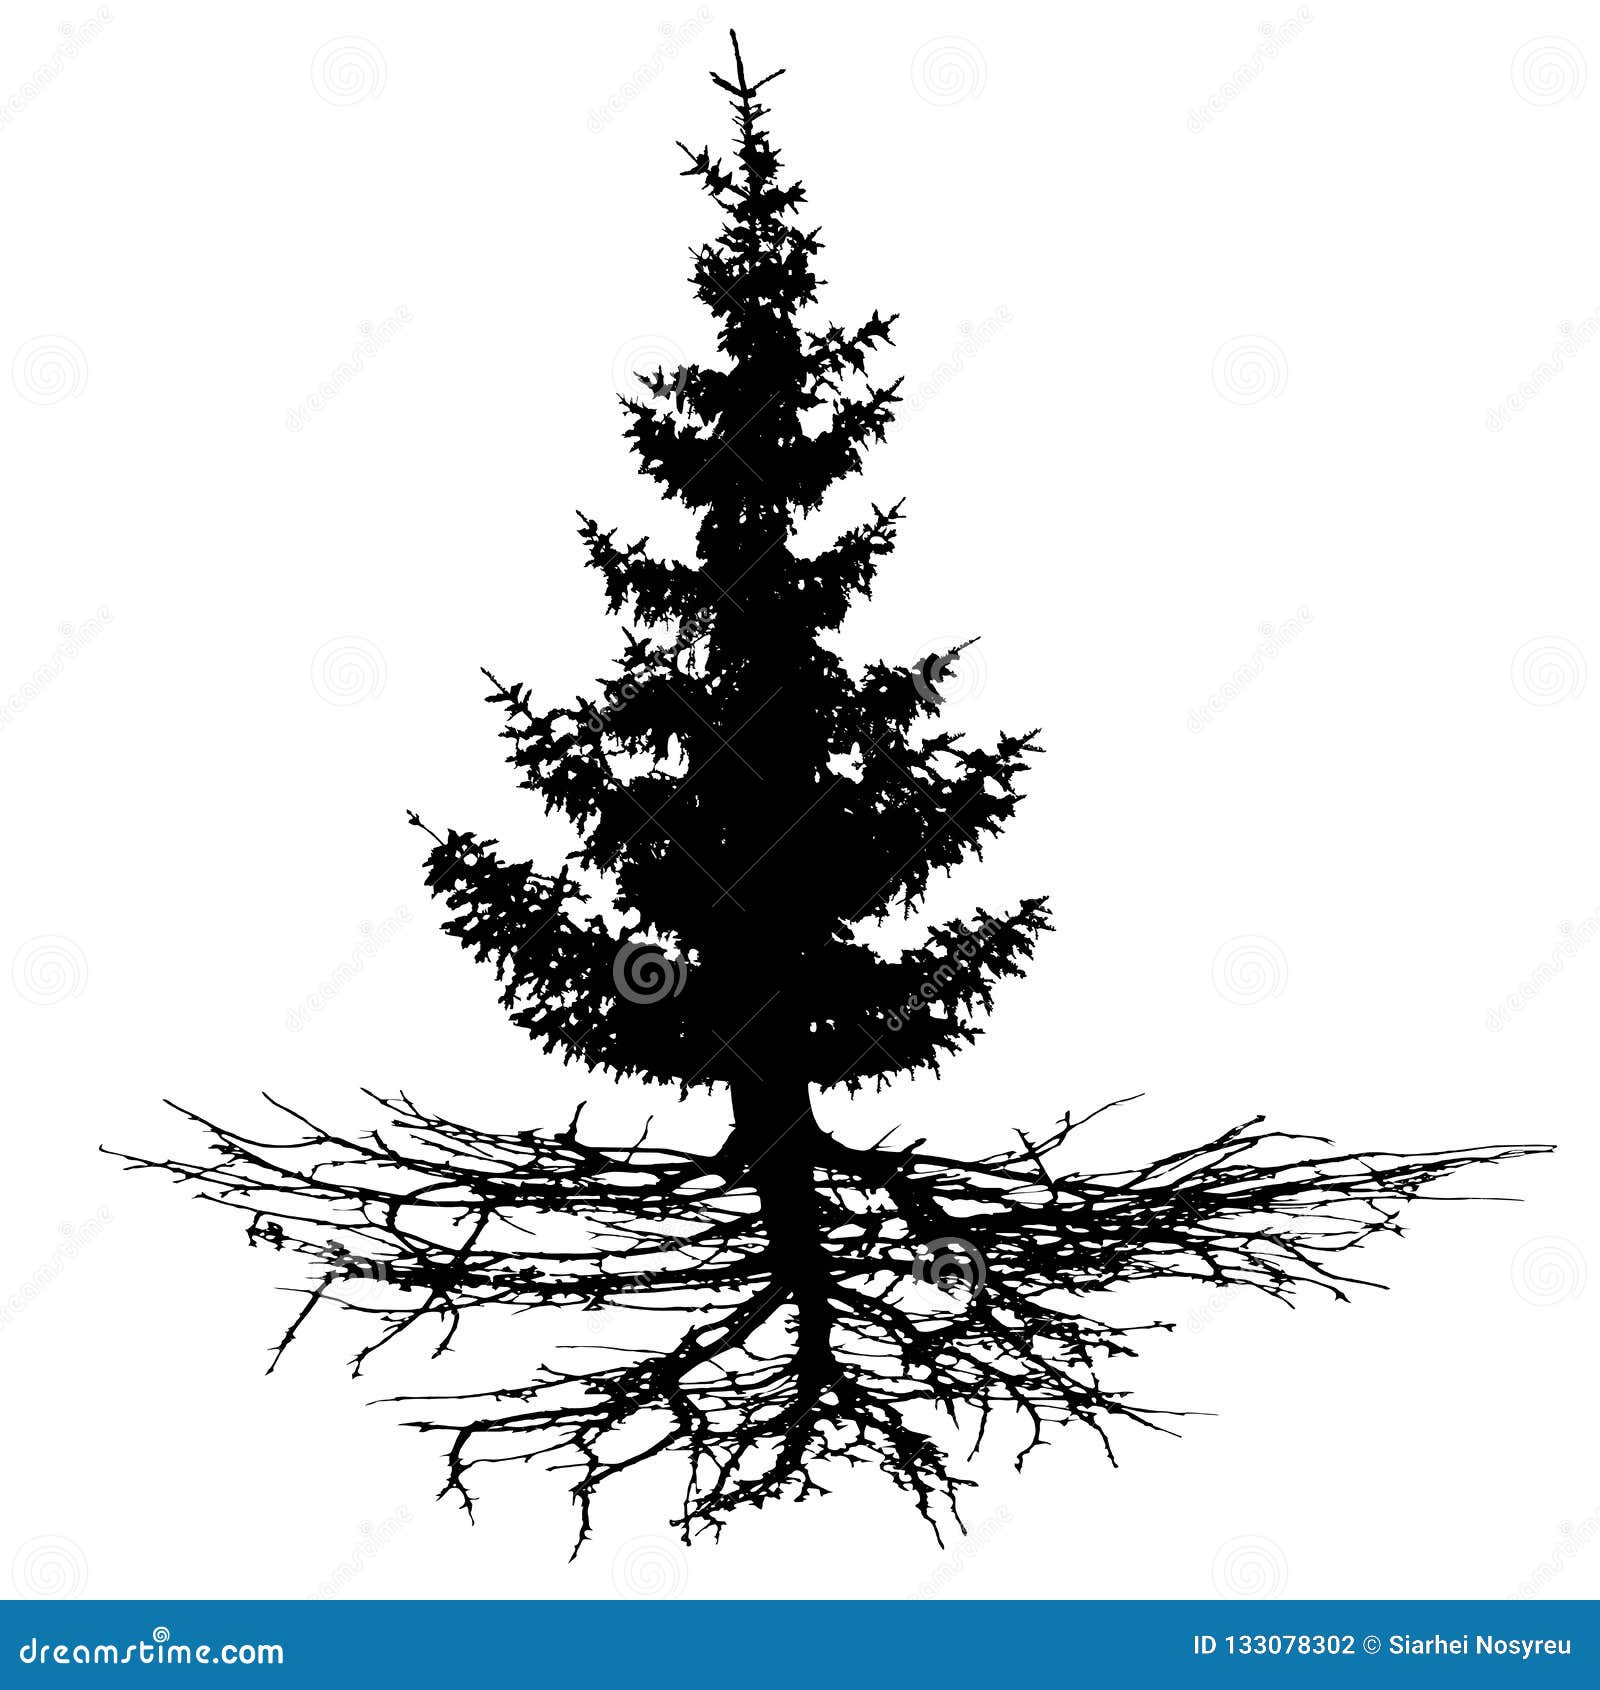 conifer tree with roots,  silhouette.